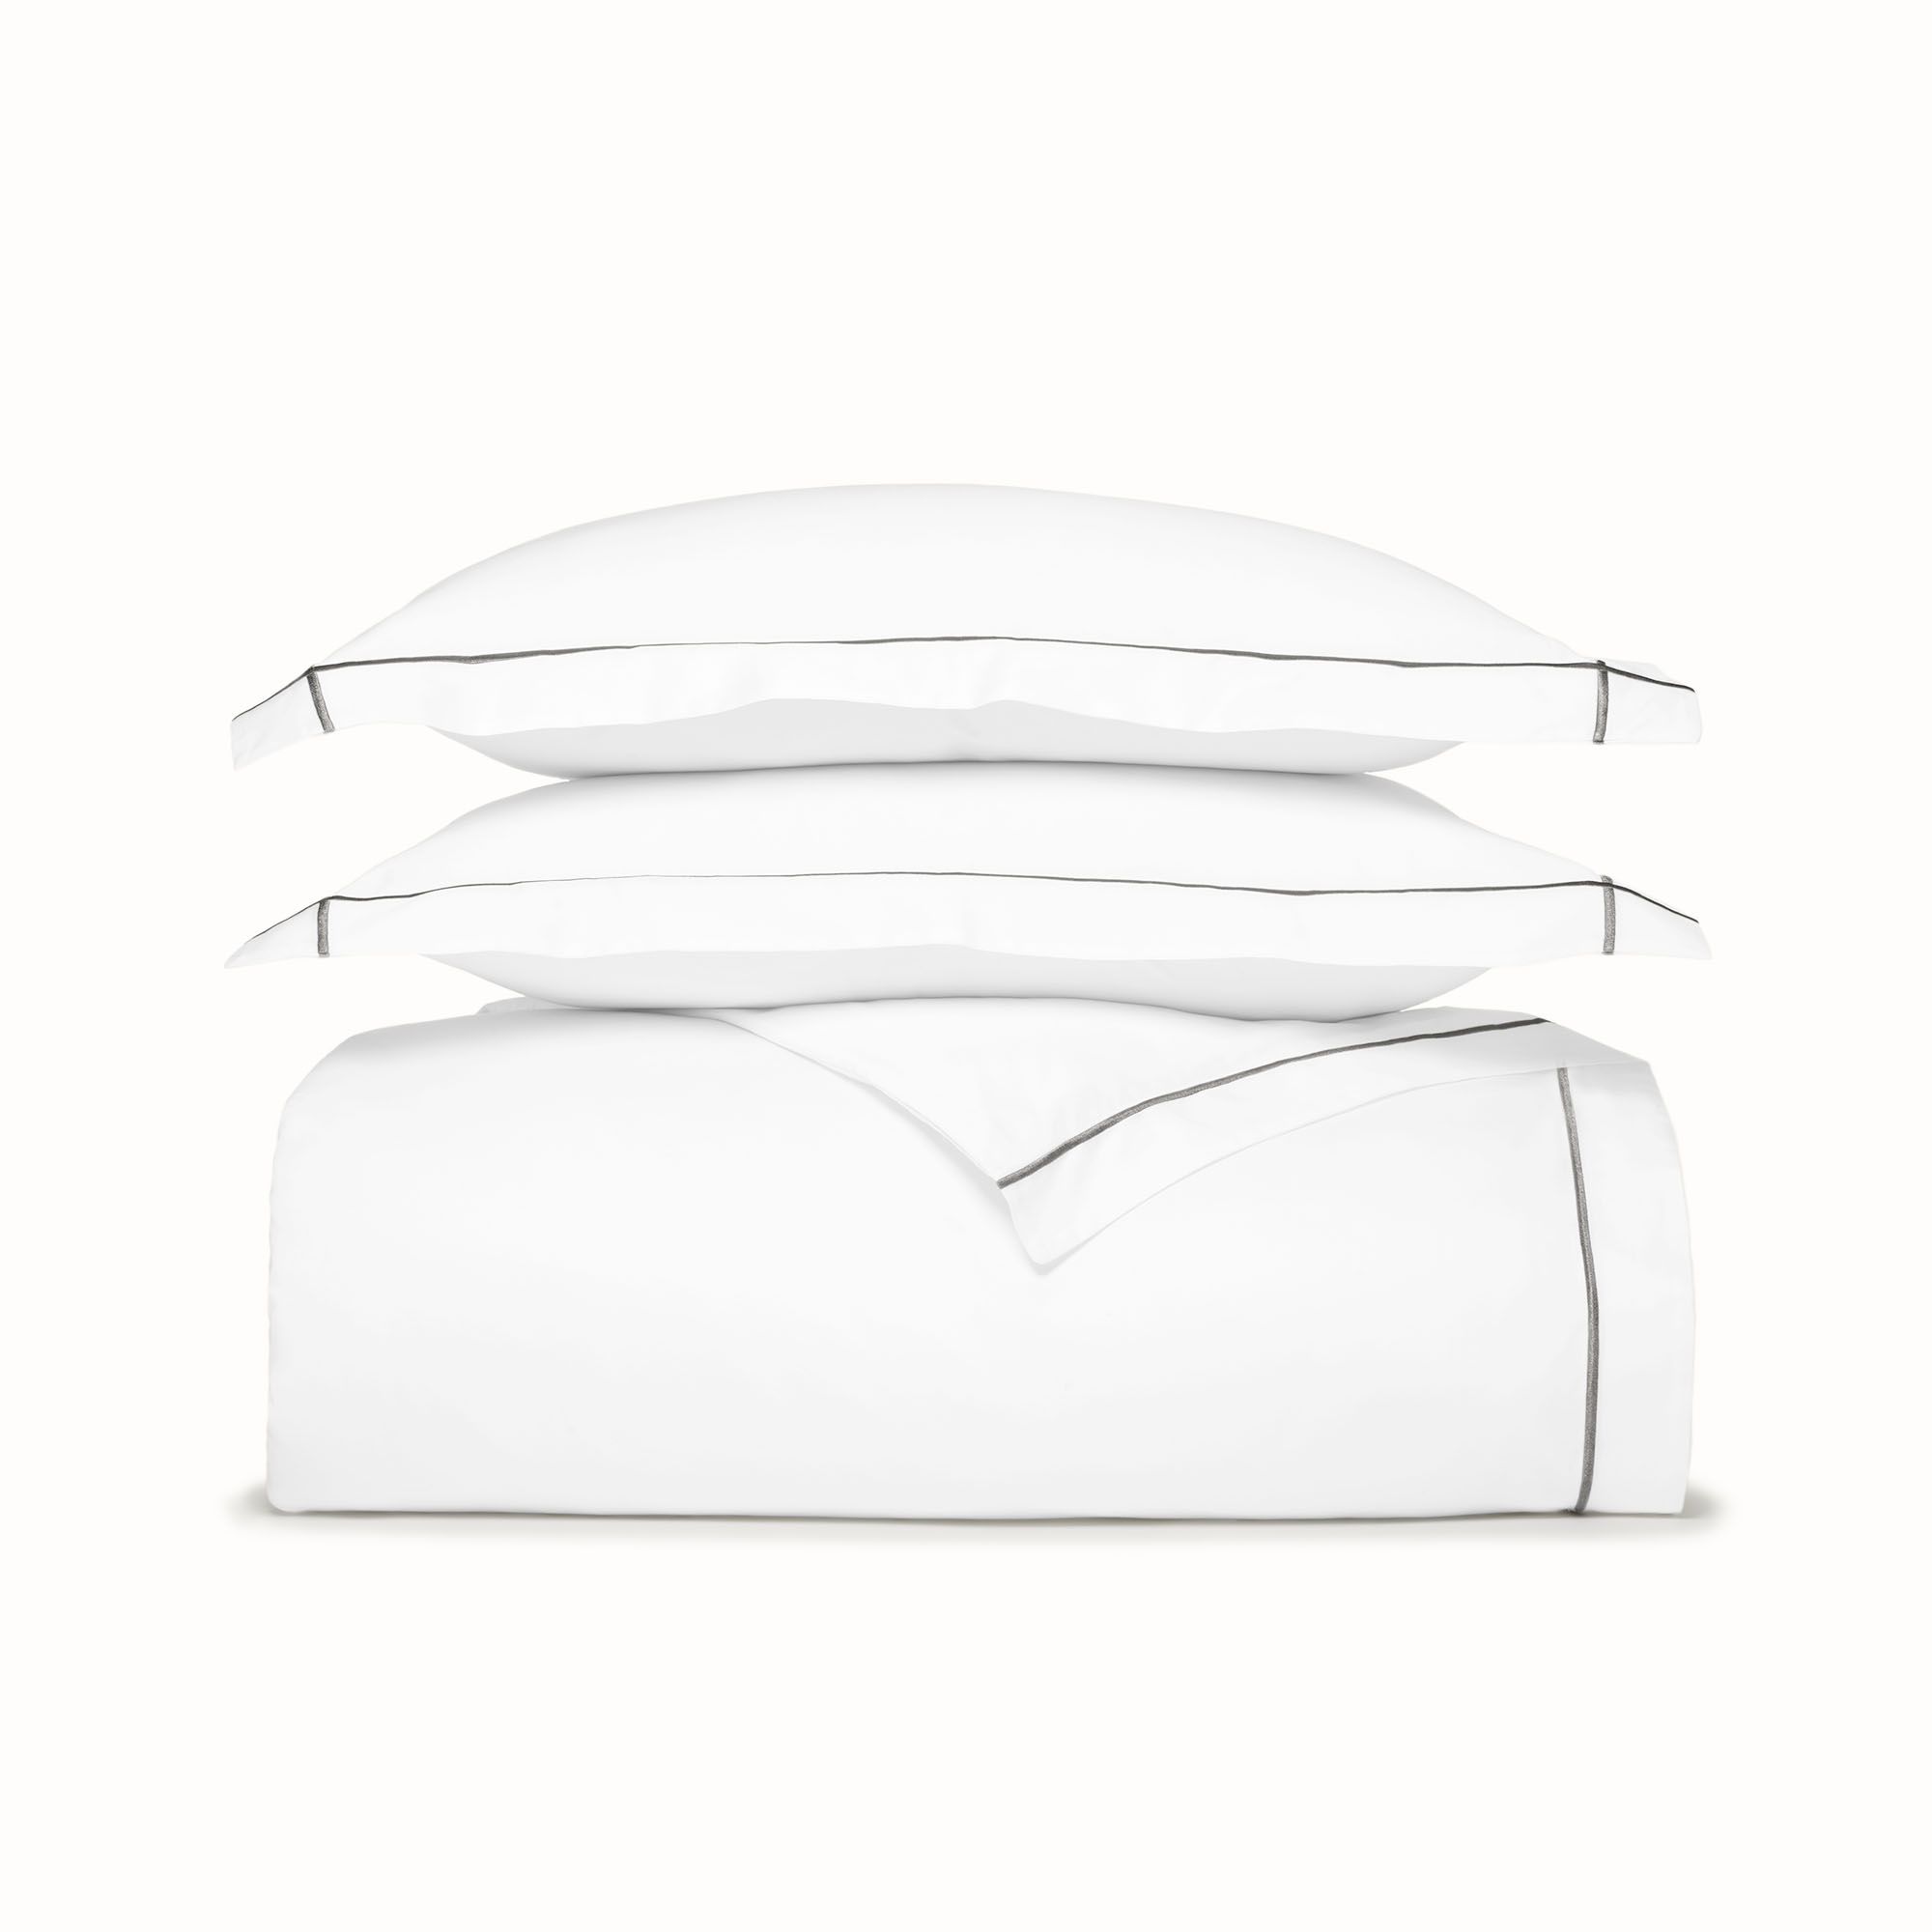 Signature Embroidered Duvet Cover Set | Boll & Branch® | Boll & Branch